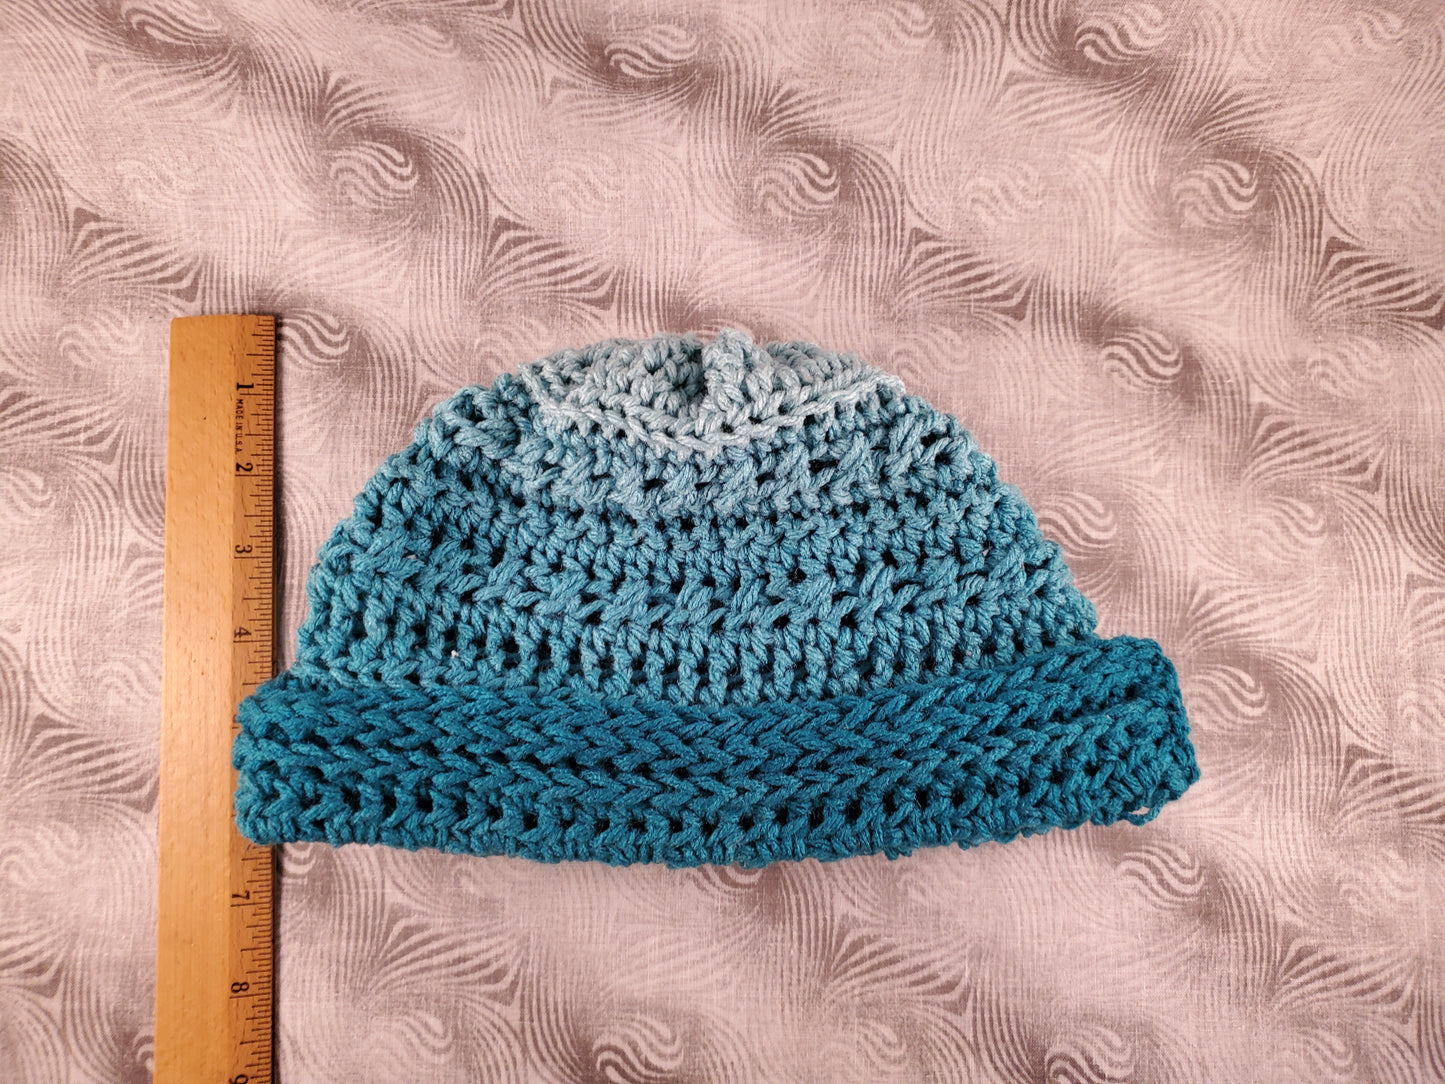 Handcrafted Ombre Crocheted Beanie - Teal to Mint Green